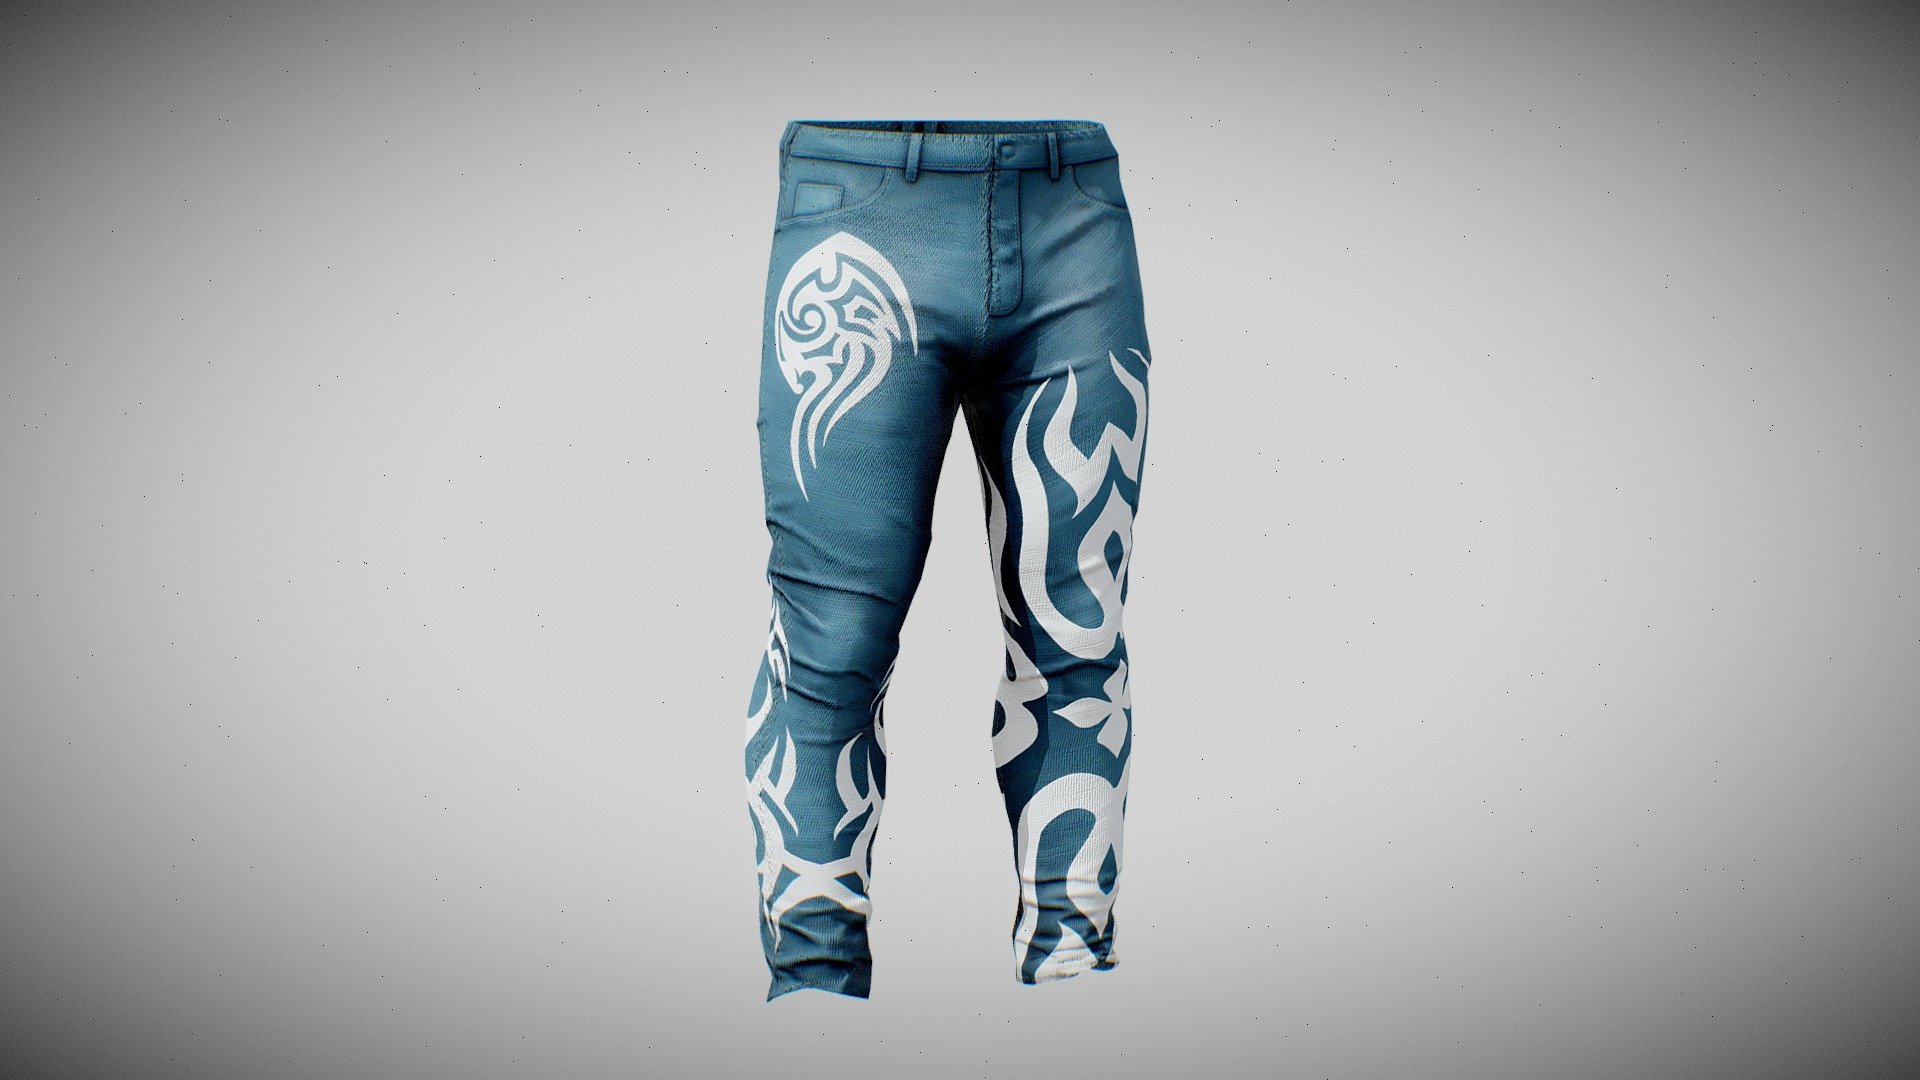 Made in Blender &amp; Substance Painter. Fitted and Rigged to the standard male metahuman.

Links to social media and support: https://linktr.ee/tikodev

Get exclusive models and support me: patreon.com/tiko - Tribal Jeans (Metahuman Ready) - Buy Royalty Free 3D model by Tiko (@tikoavp) 3d model